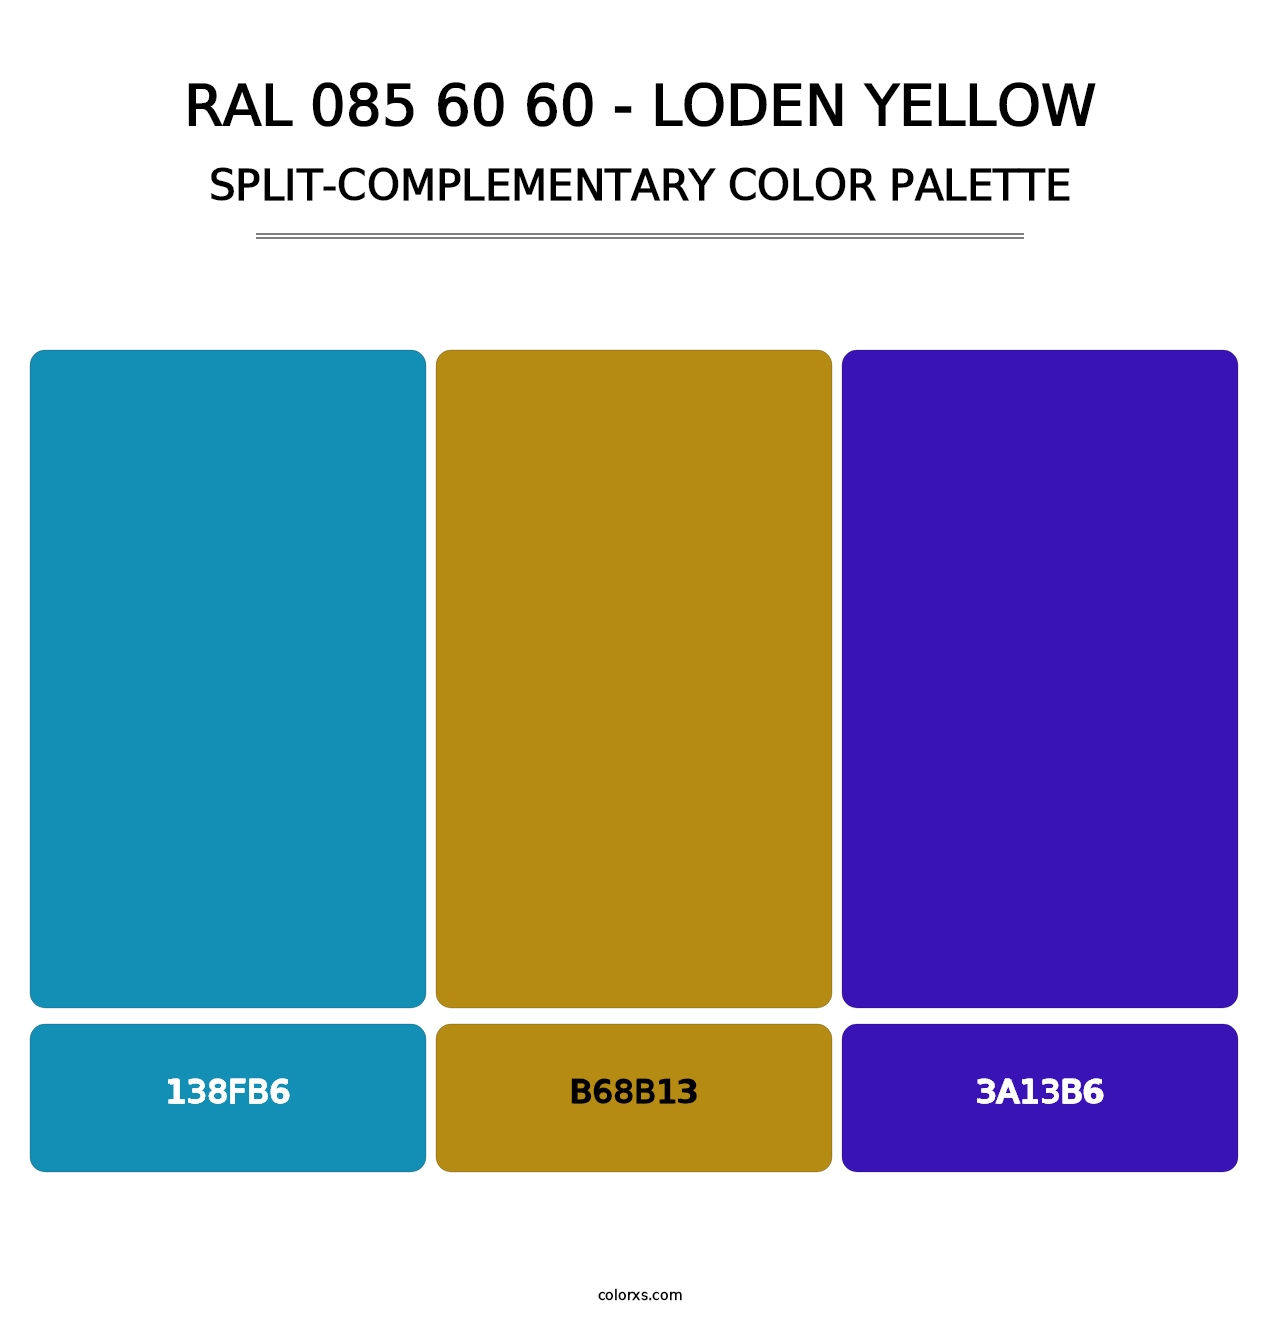 RAL 085 60 60 - Loden Yellow - Split-Complementary Color Palette